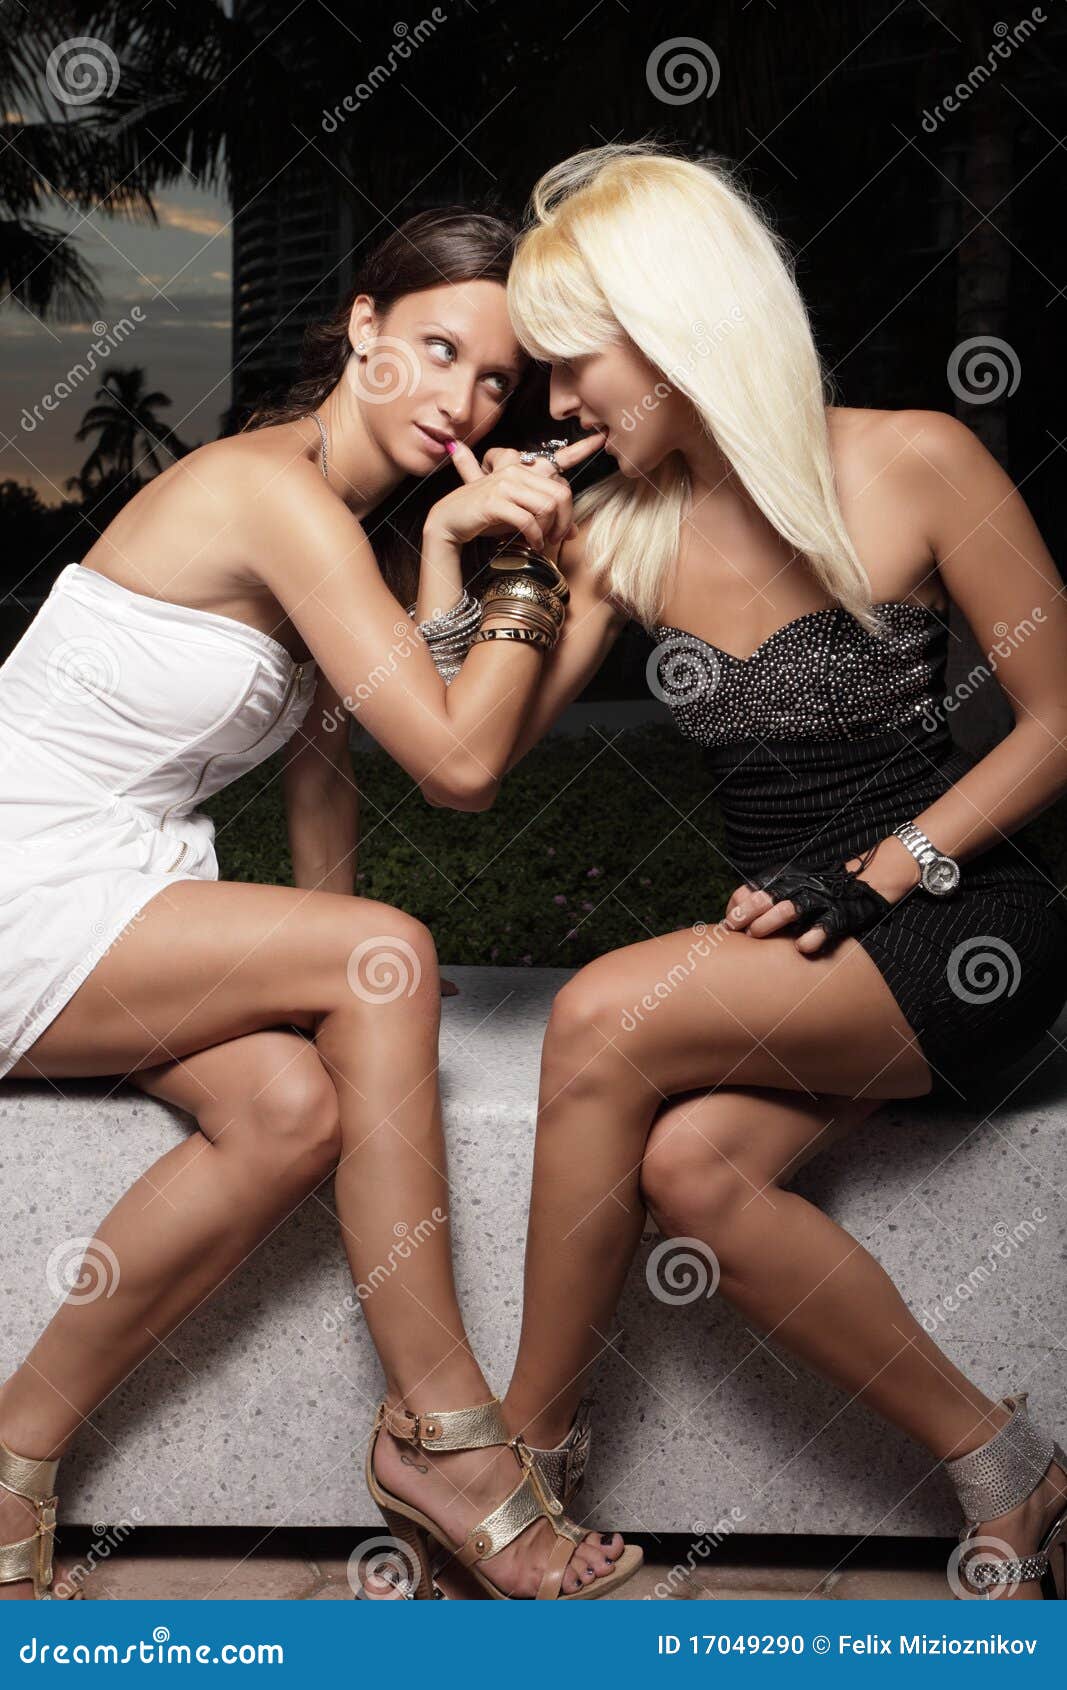 Two Fashion Models Same Looks Outfits Stock Photo 2176518675 | Shutterstock